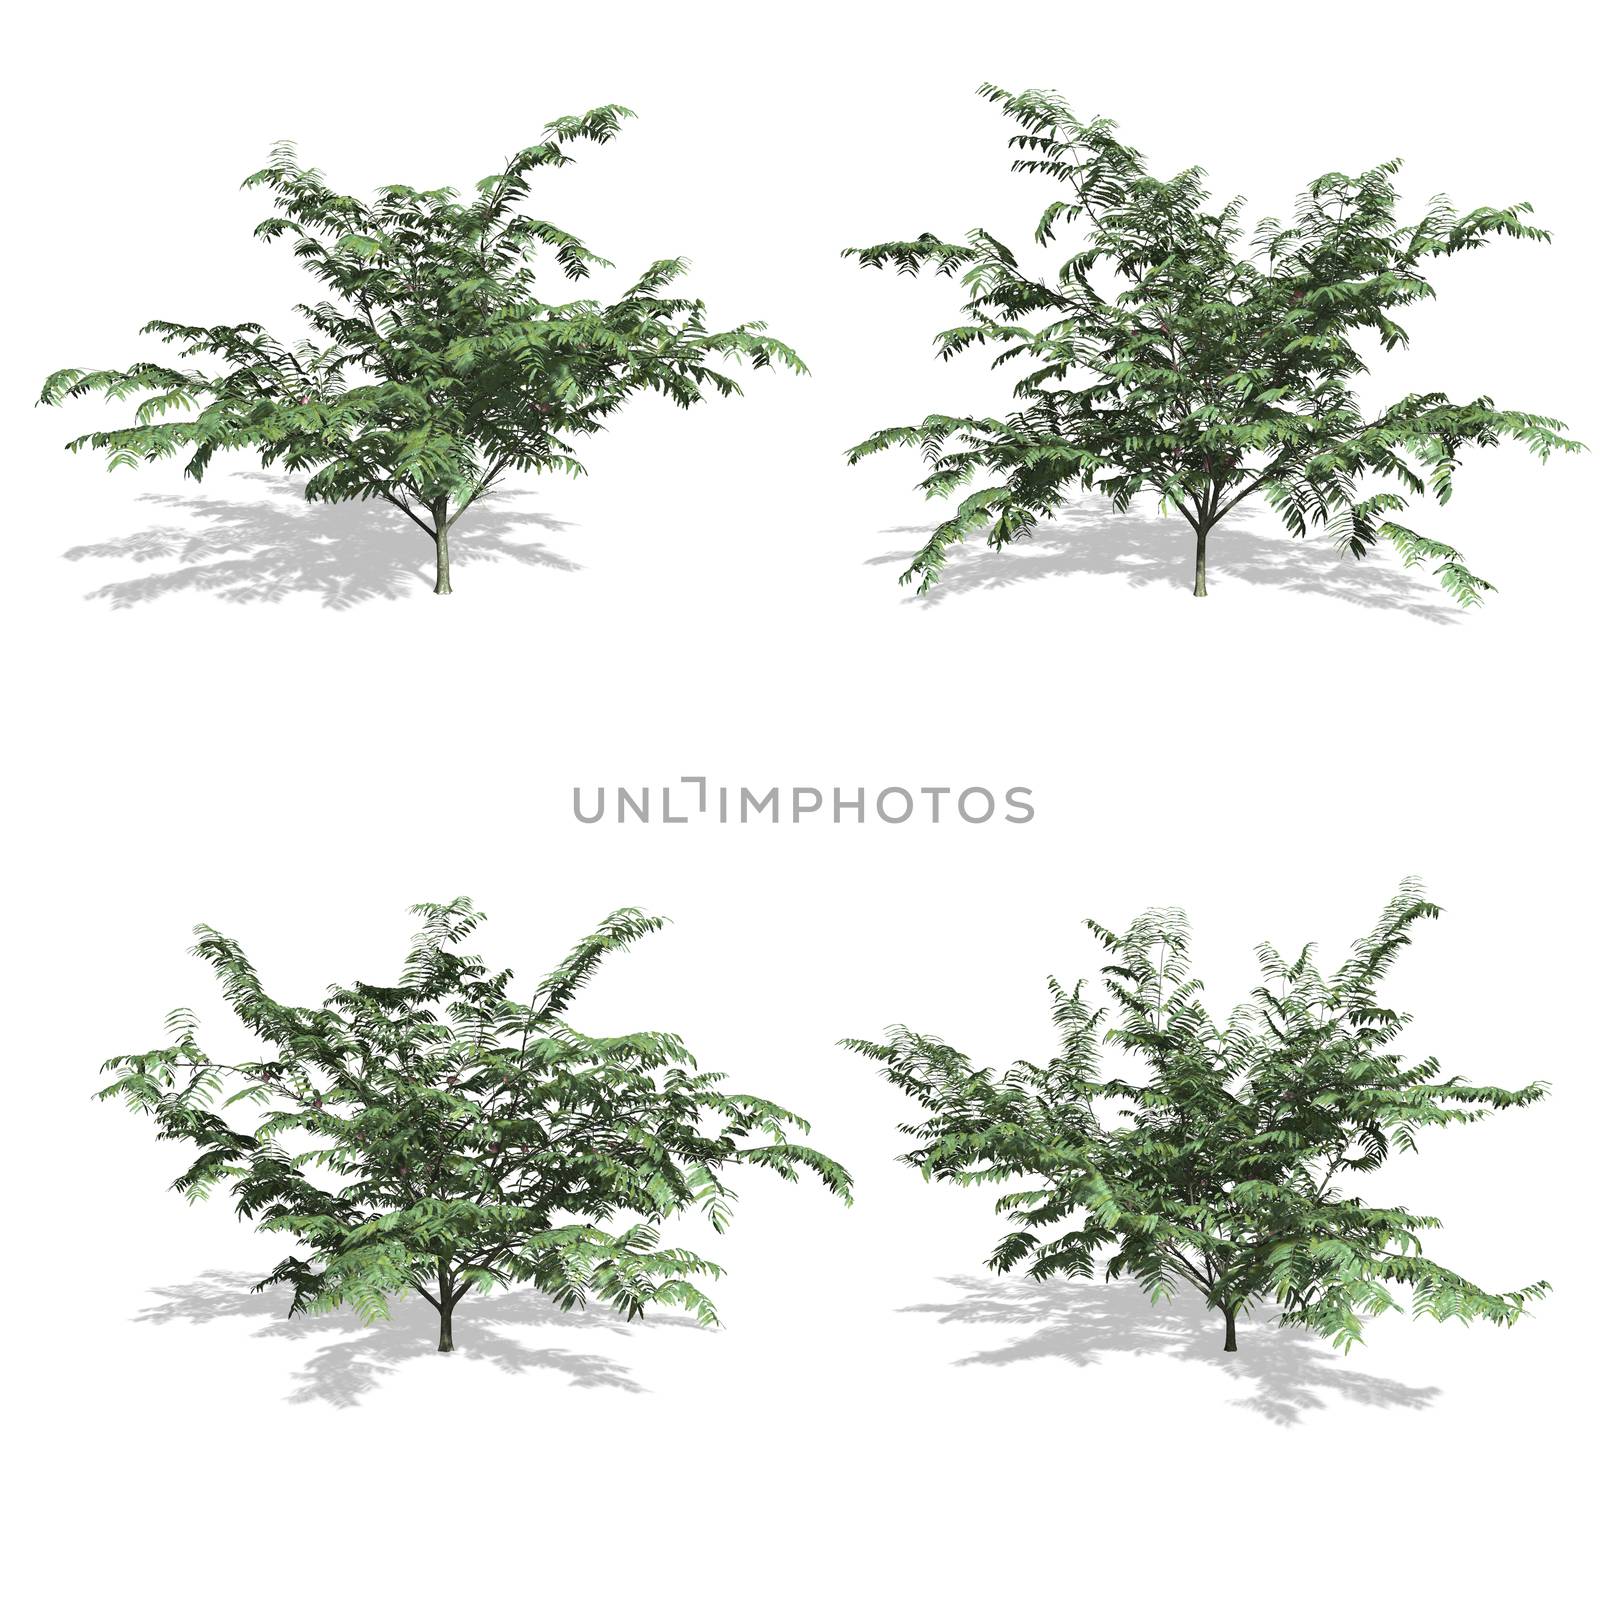 Mimosa trees, isolated on white background.